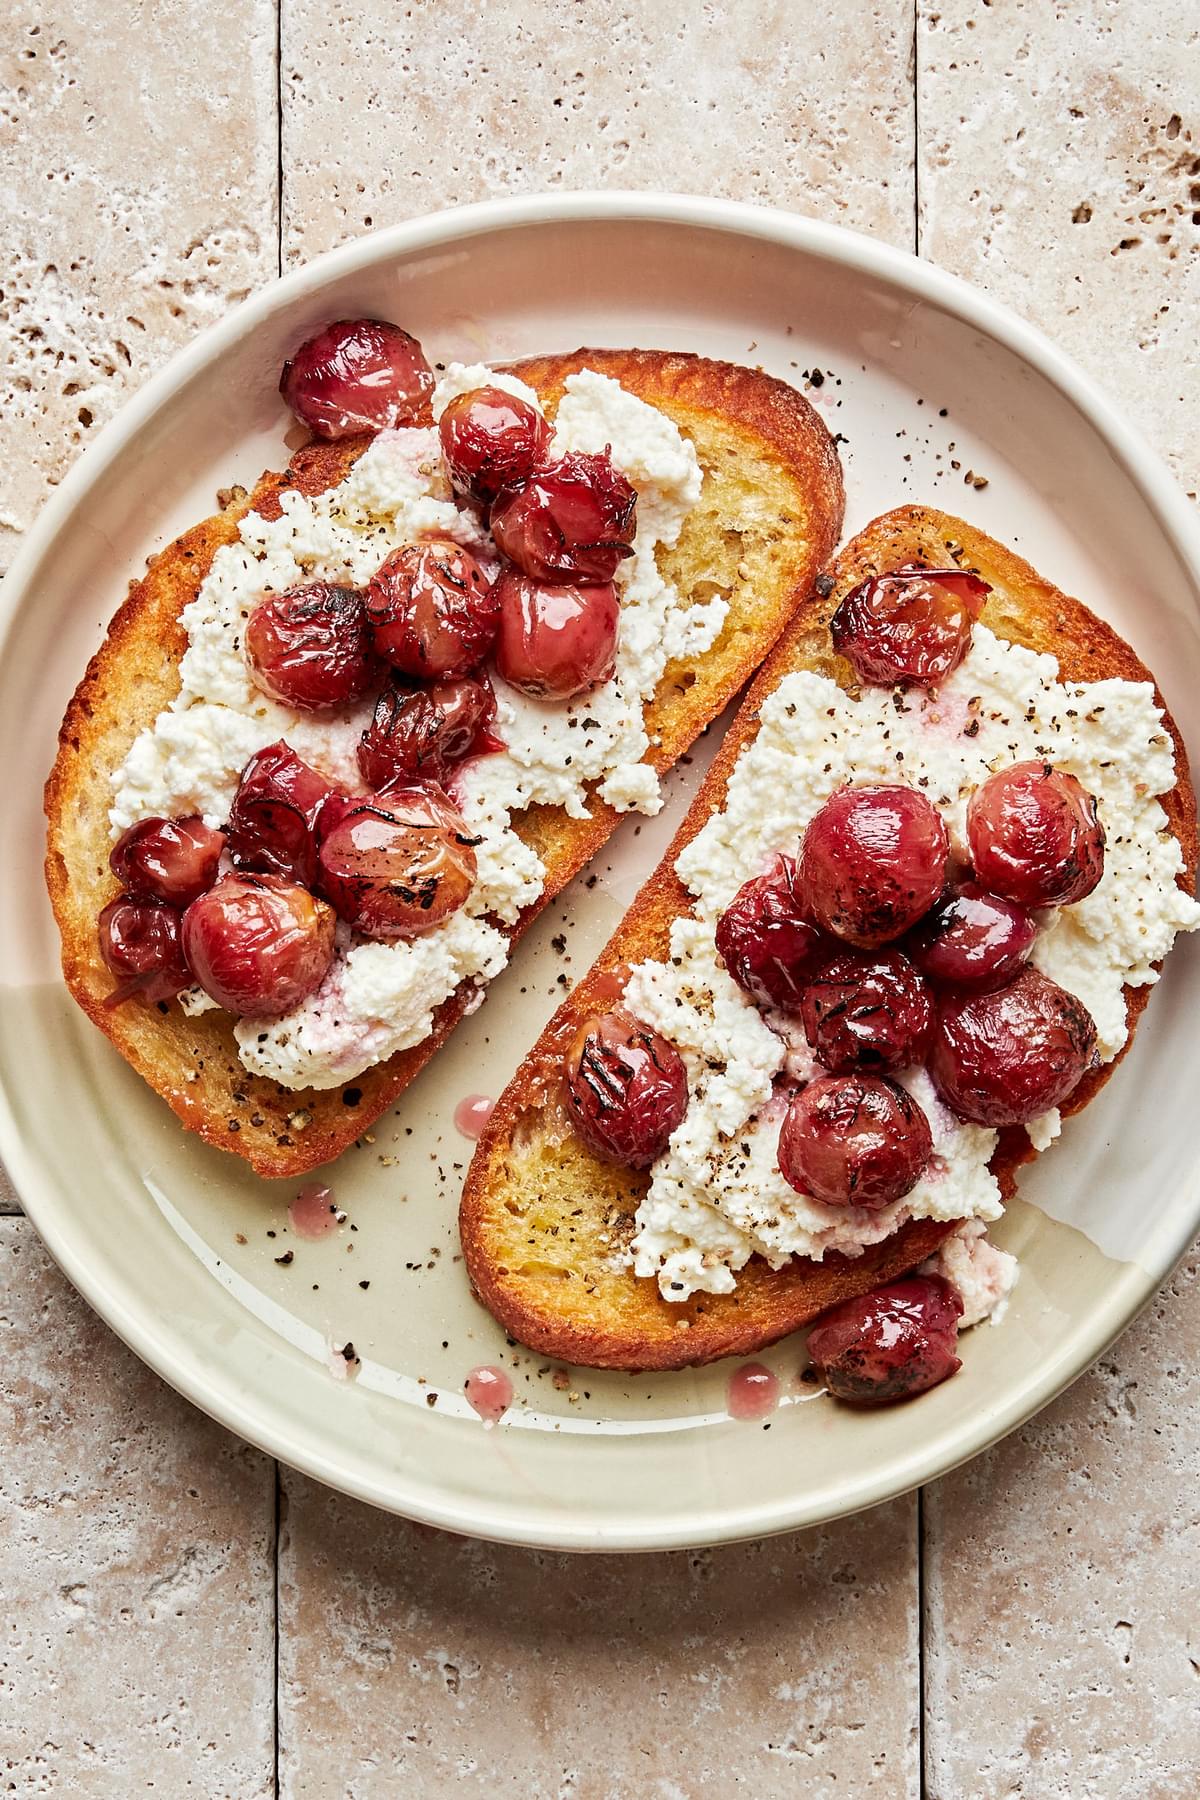 2 slices crusty bread topped with ricotta cheese and roasted red grapes